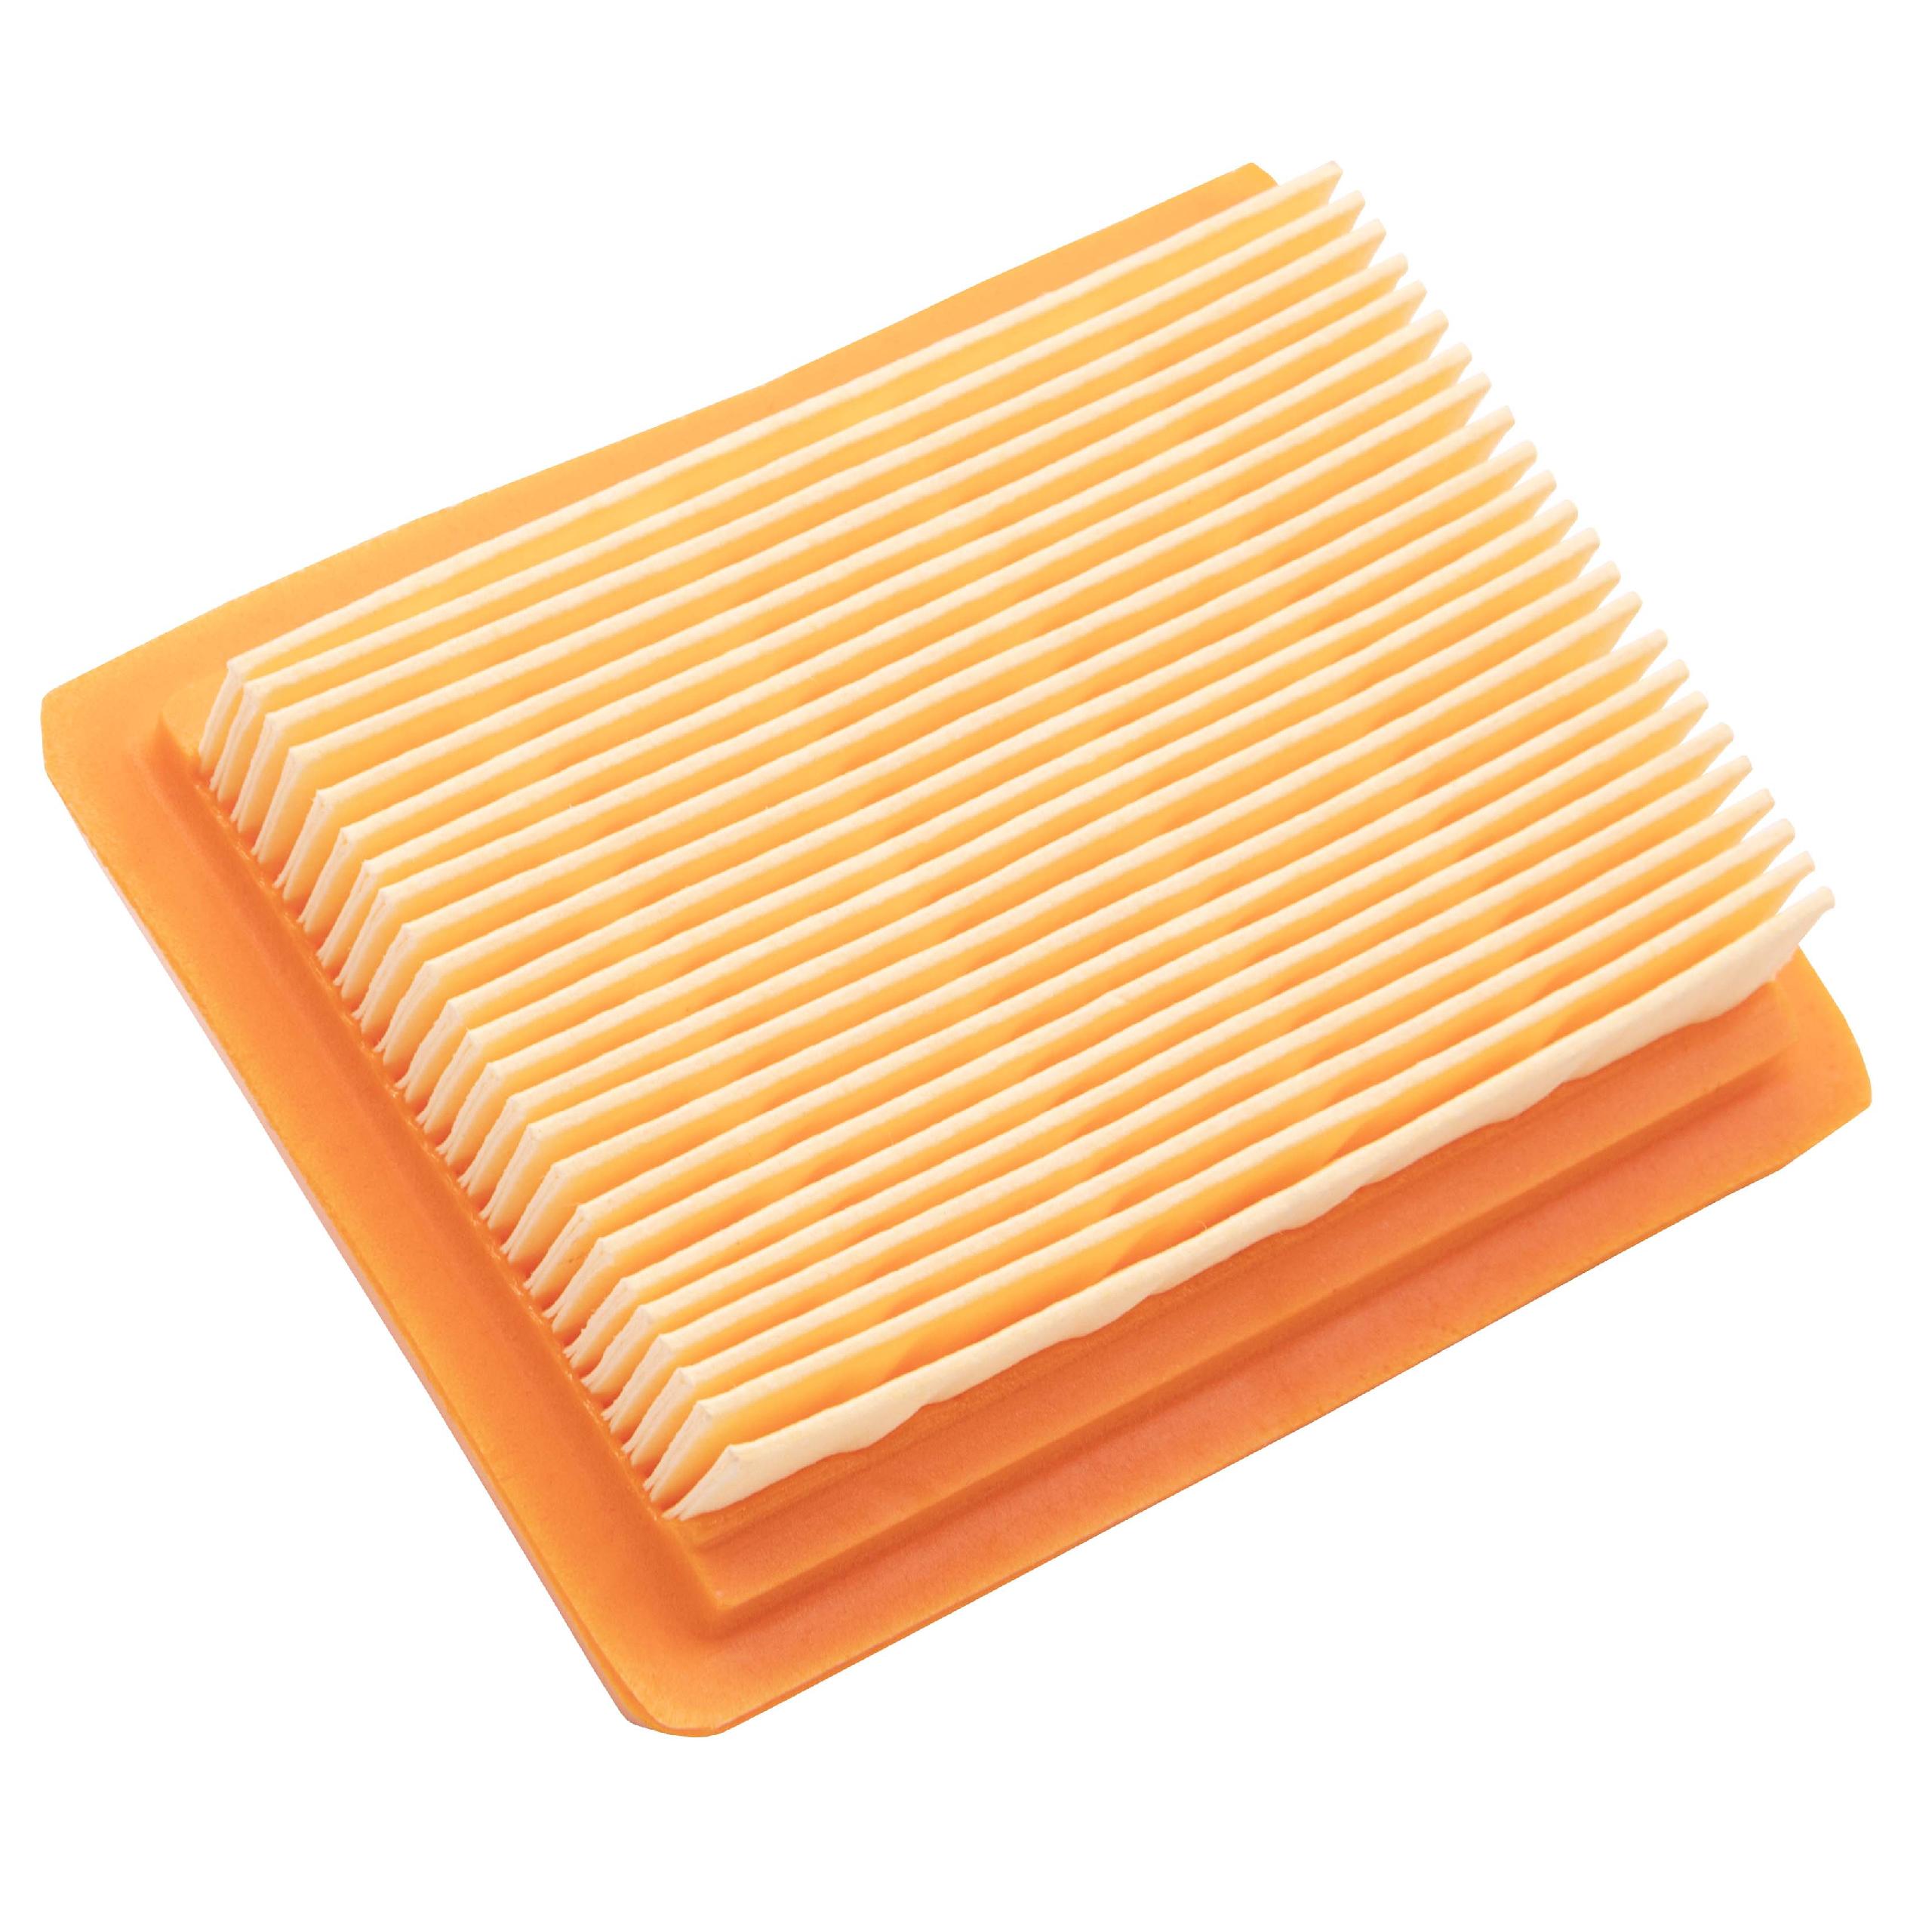  Air Filter as Replacement for Oregon 55-079